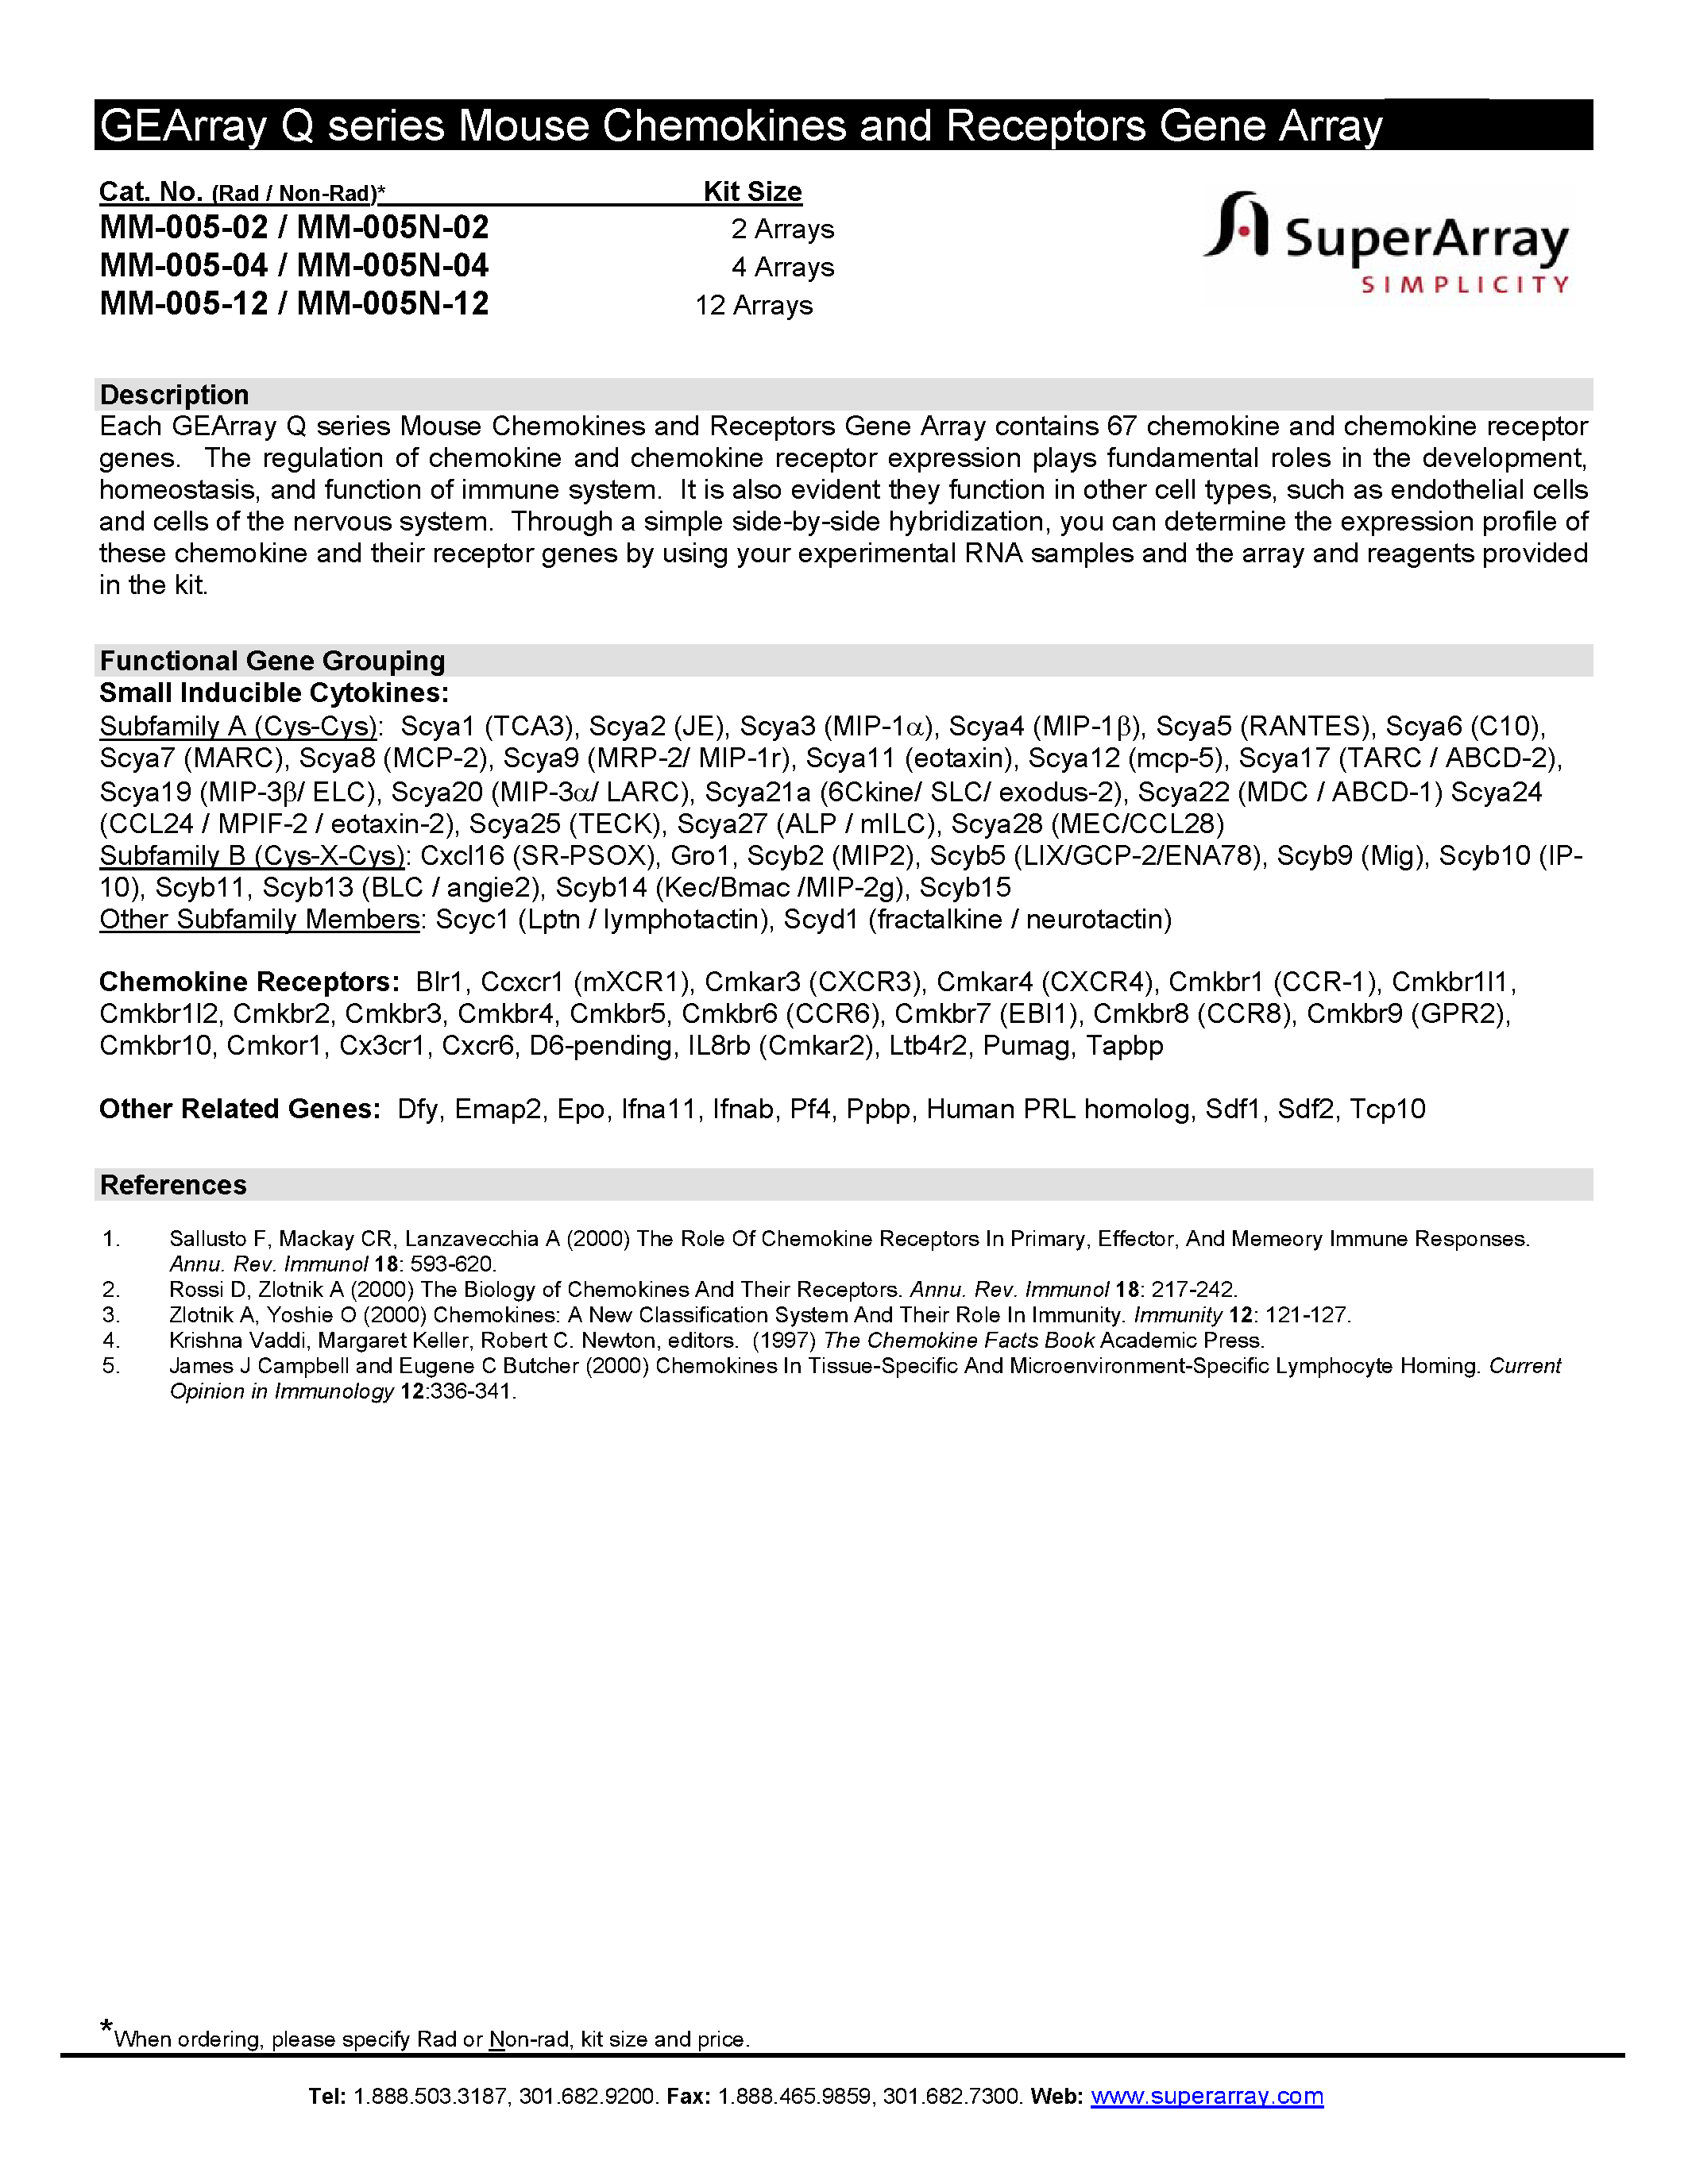 Datasheet MM-005N-02 - GEArray Q series Mouse Chemokines and Receptors Gene Array page 1